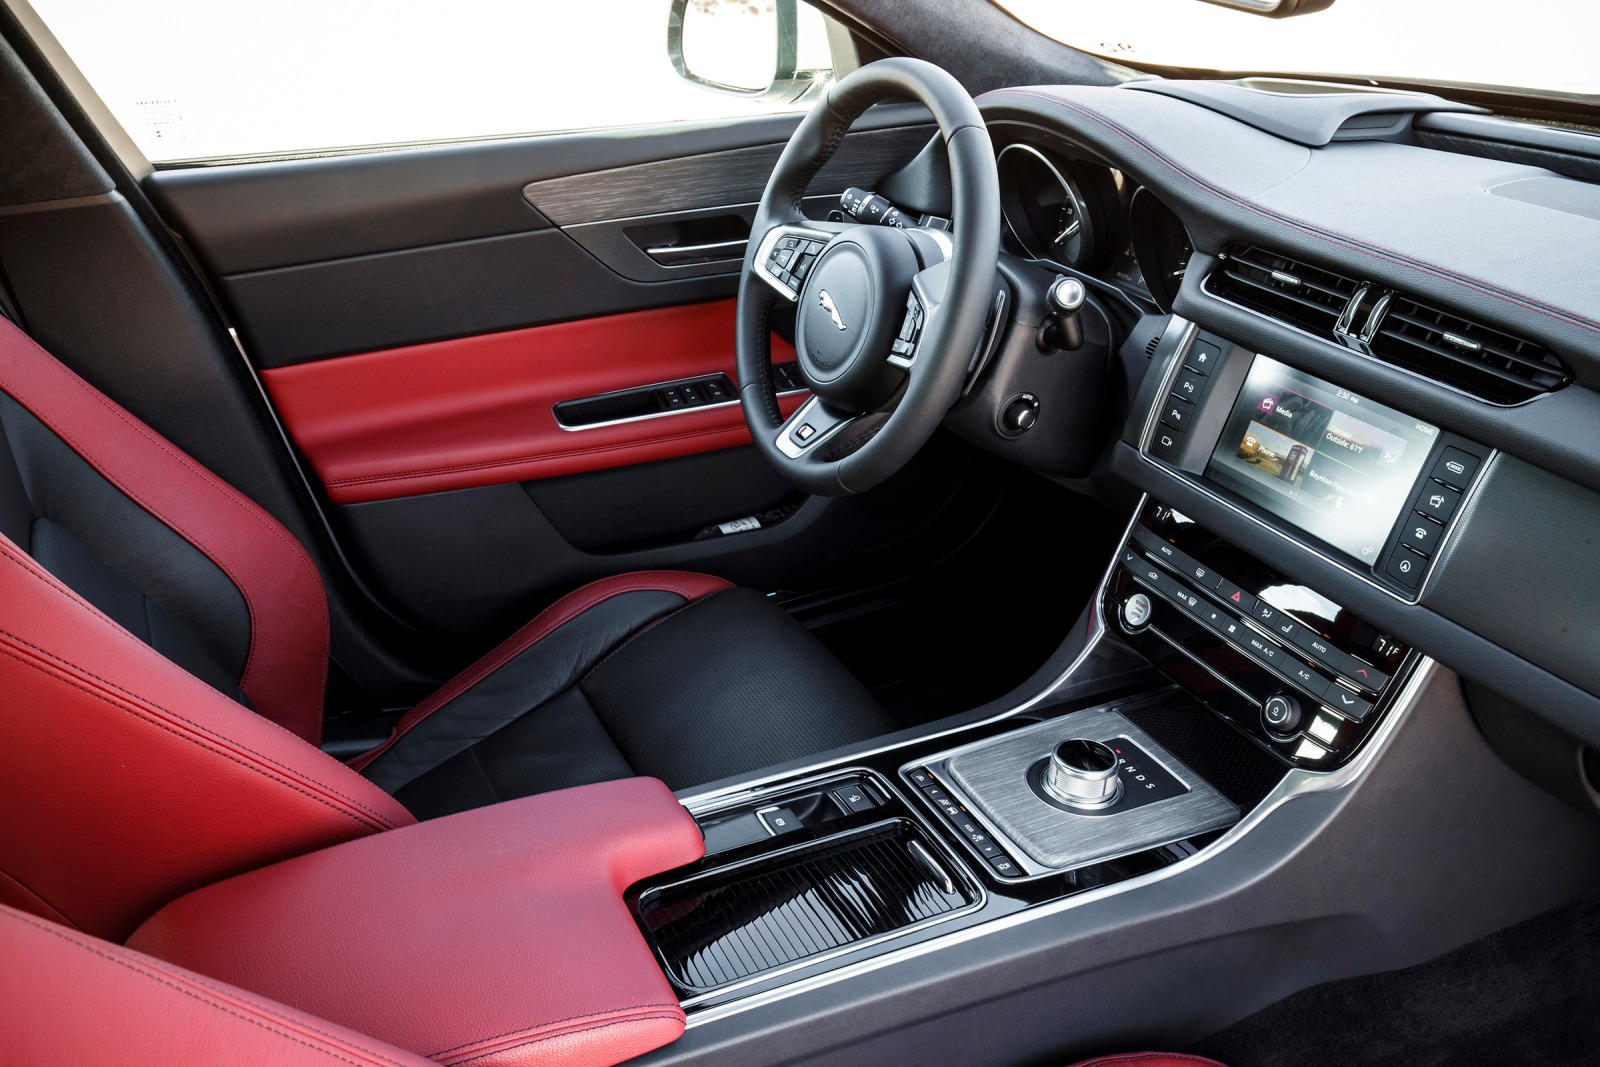 All-New 2017 Jaguar XE Interior Design and Features